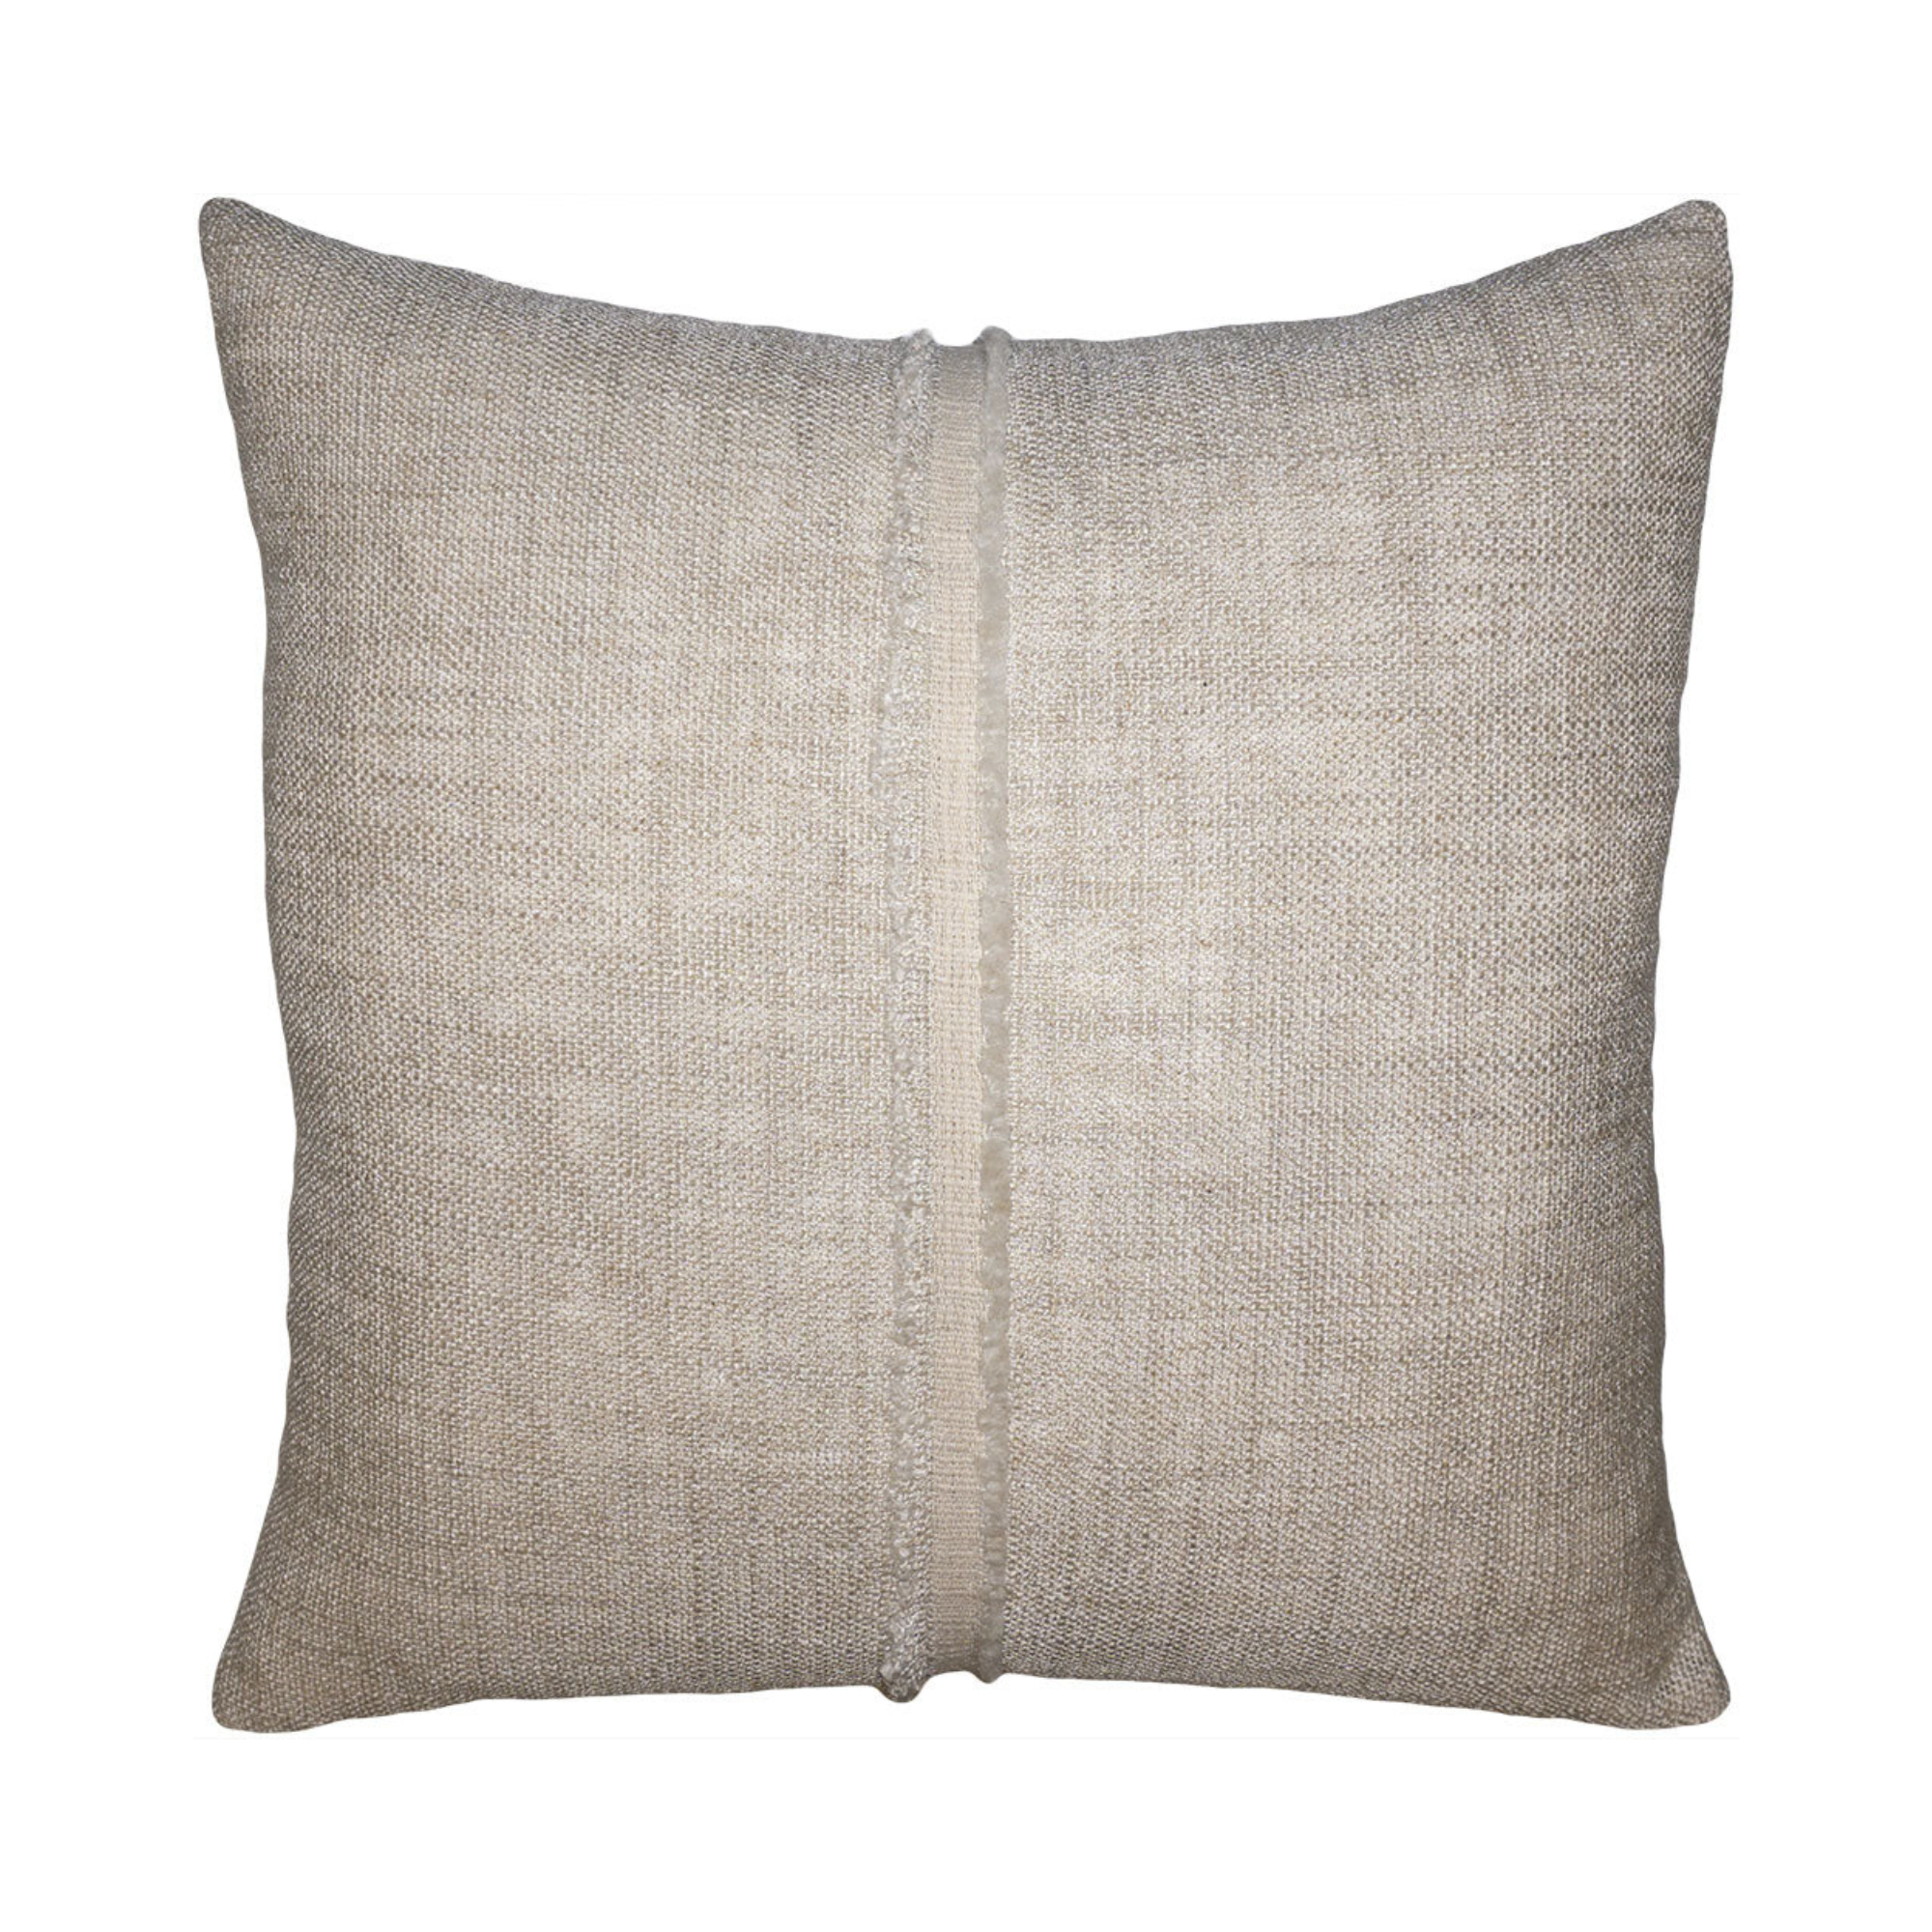 Hopsack Stitched Pillow